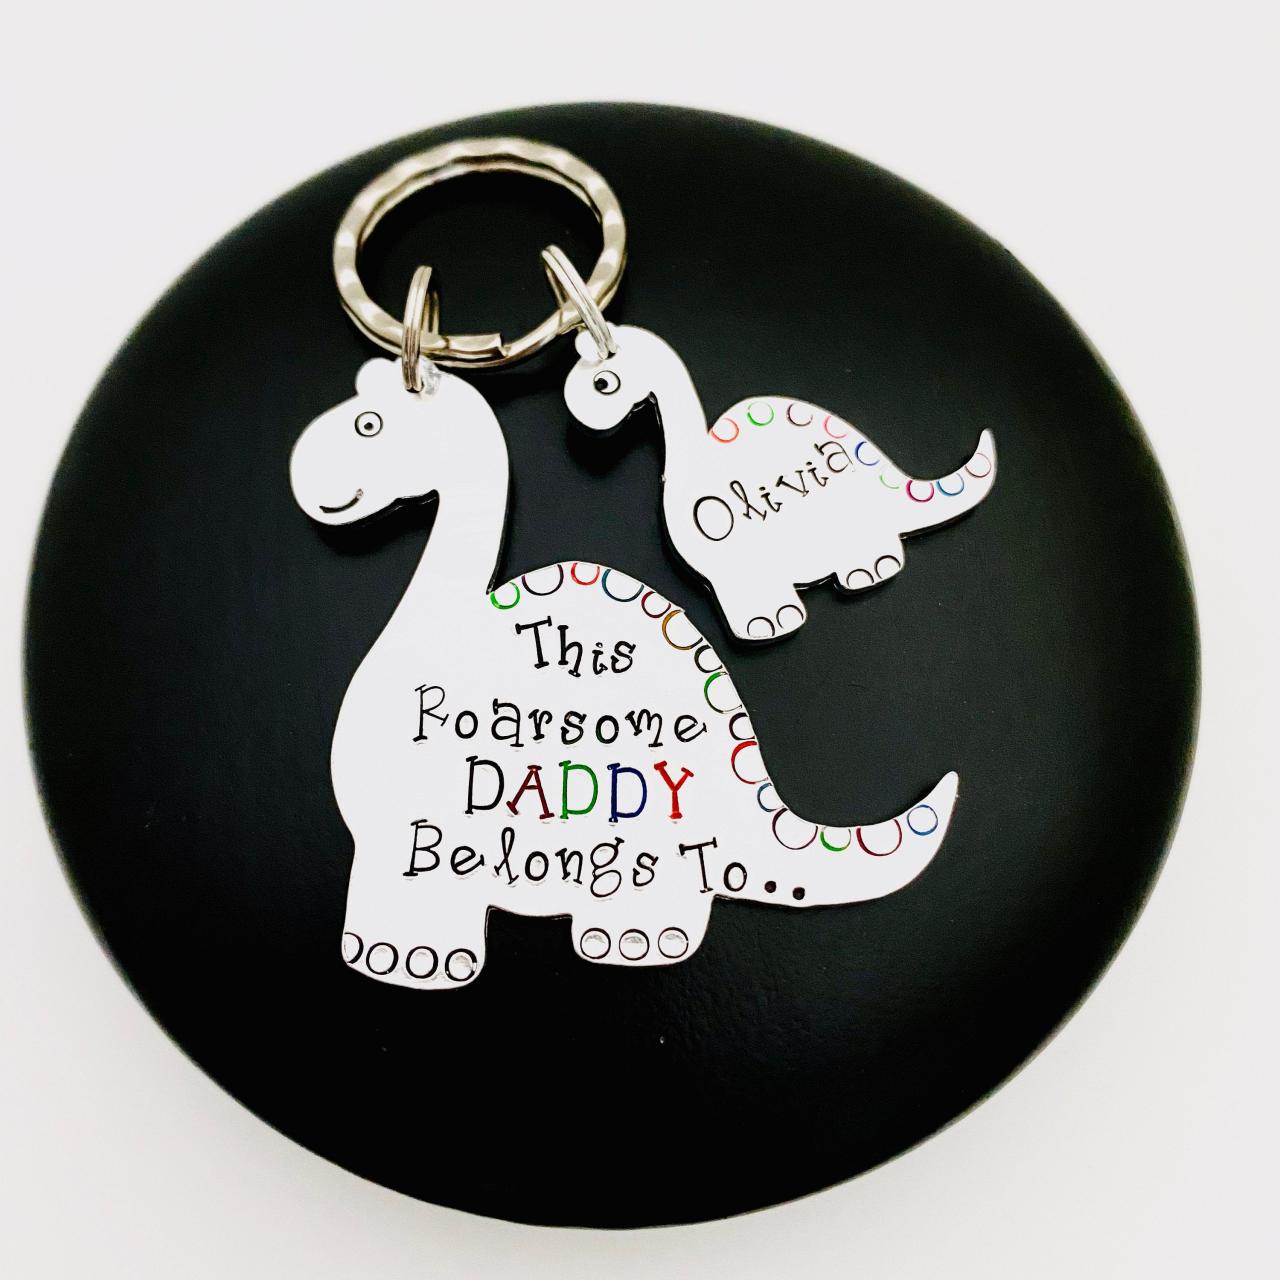 This Roarsome Daddy Belongs To Keyring, Dinosaur Keychain, Fathers Day Gift, Gift For Husband, Personalised Daddy Keychain. Daddy Gift.